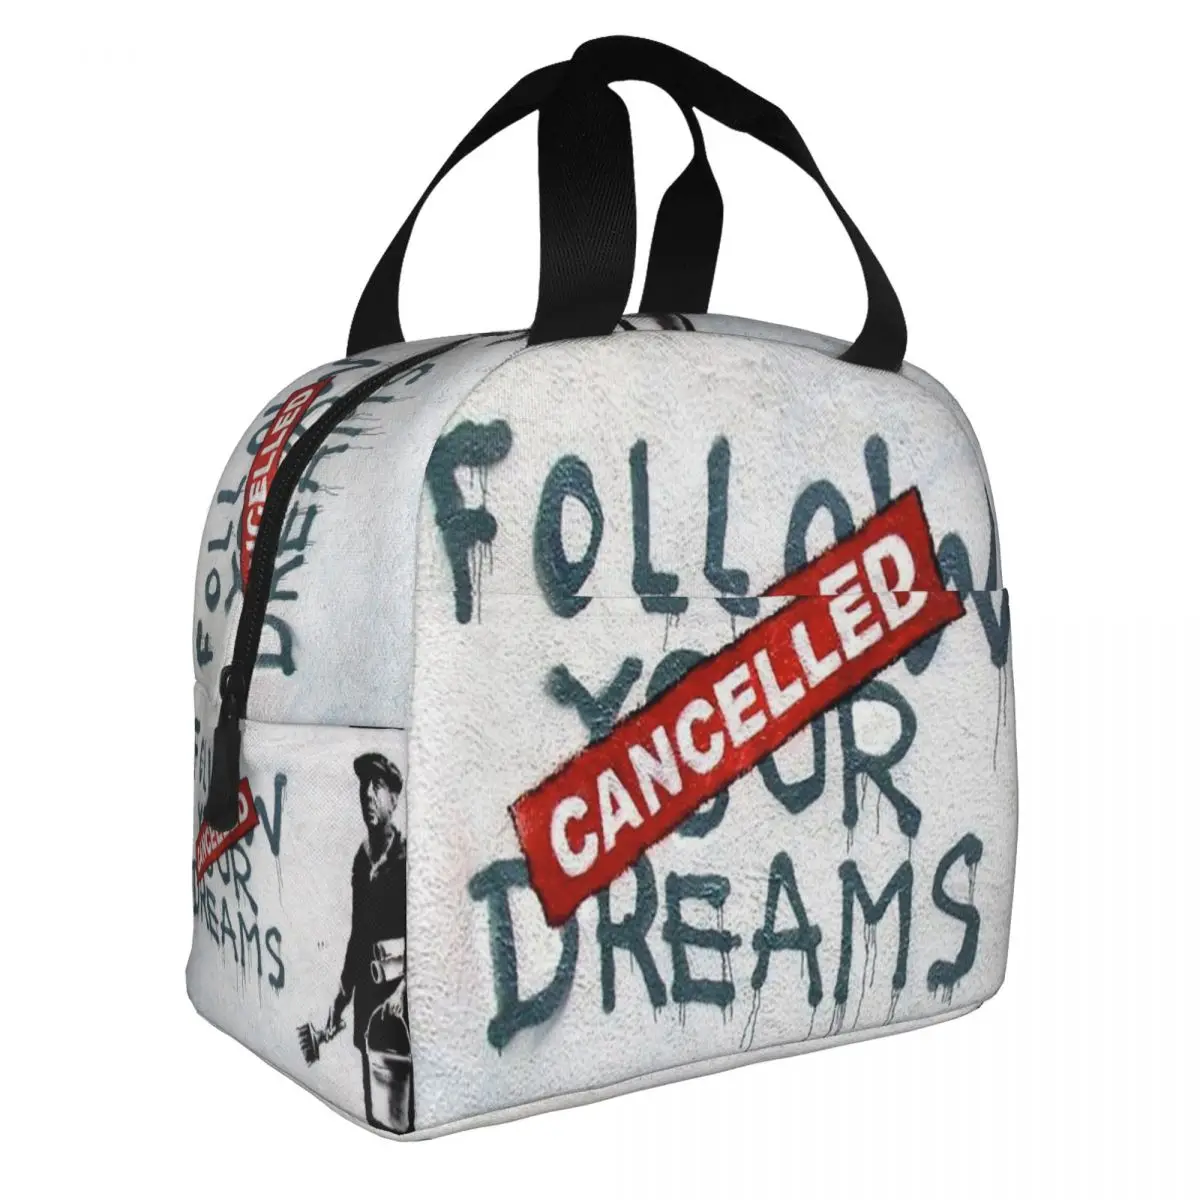 

Banksy Follow Your Dreams Insulated Lunch Bag Portable Graffiti Meal Container Thermal Bag Tote Lunch Box Office Picnic Food Bag